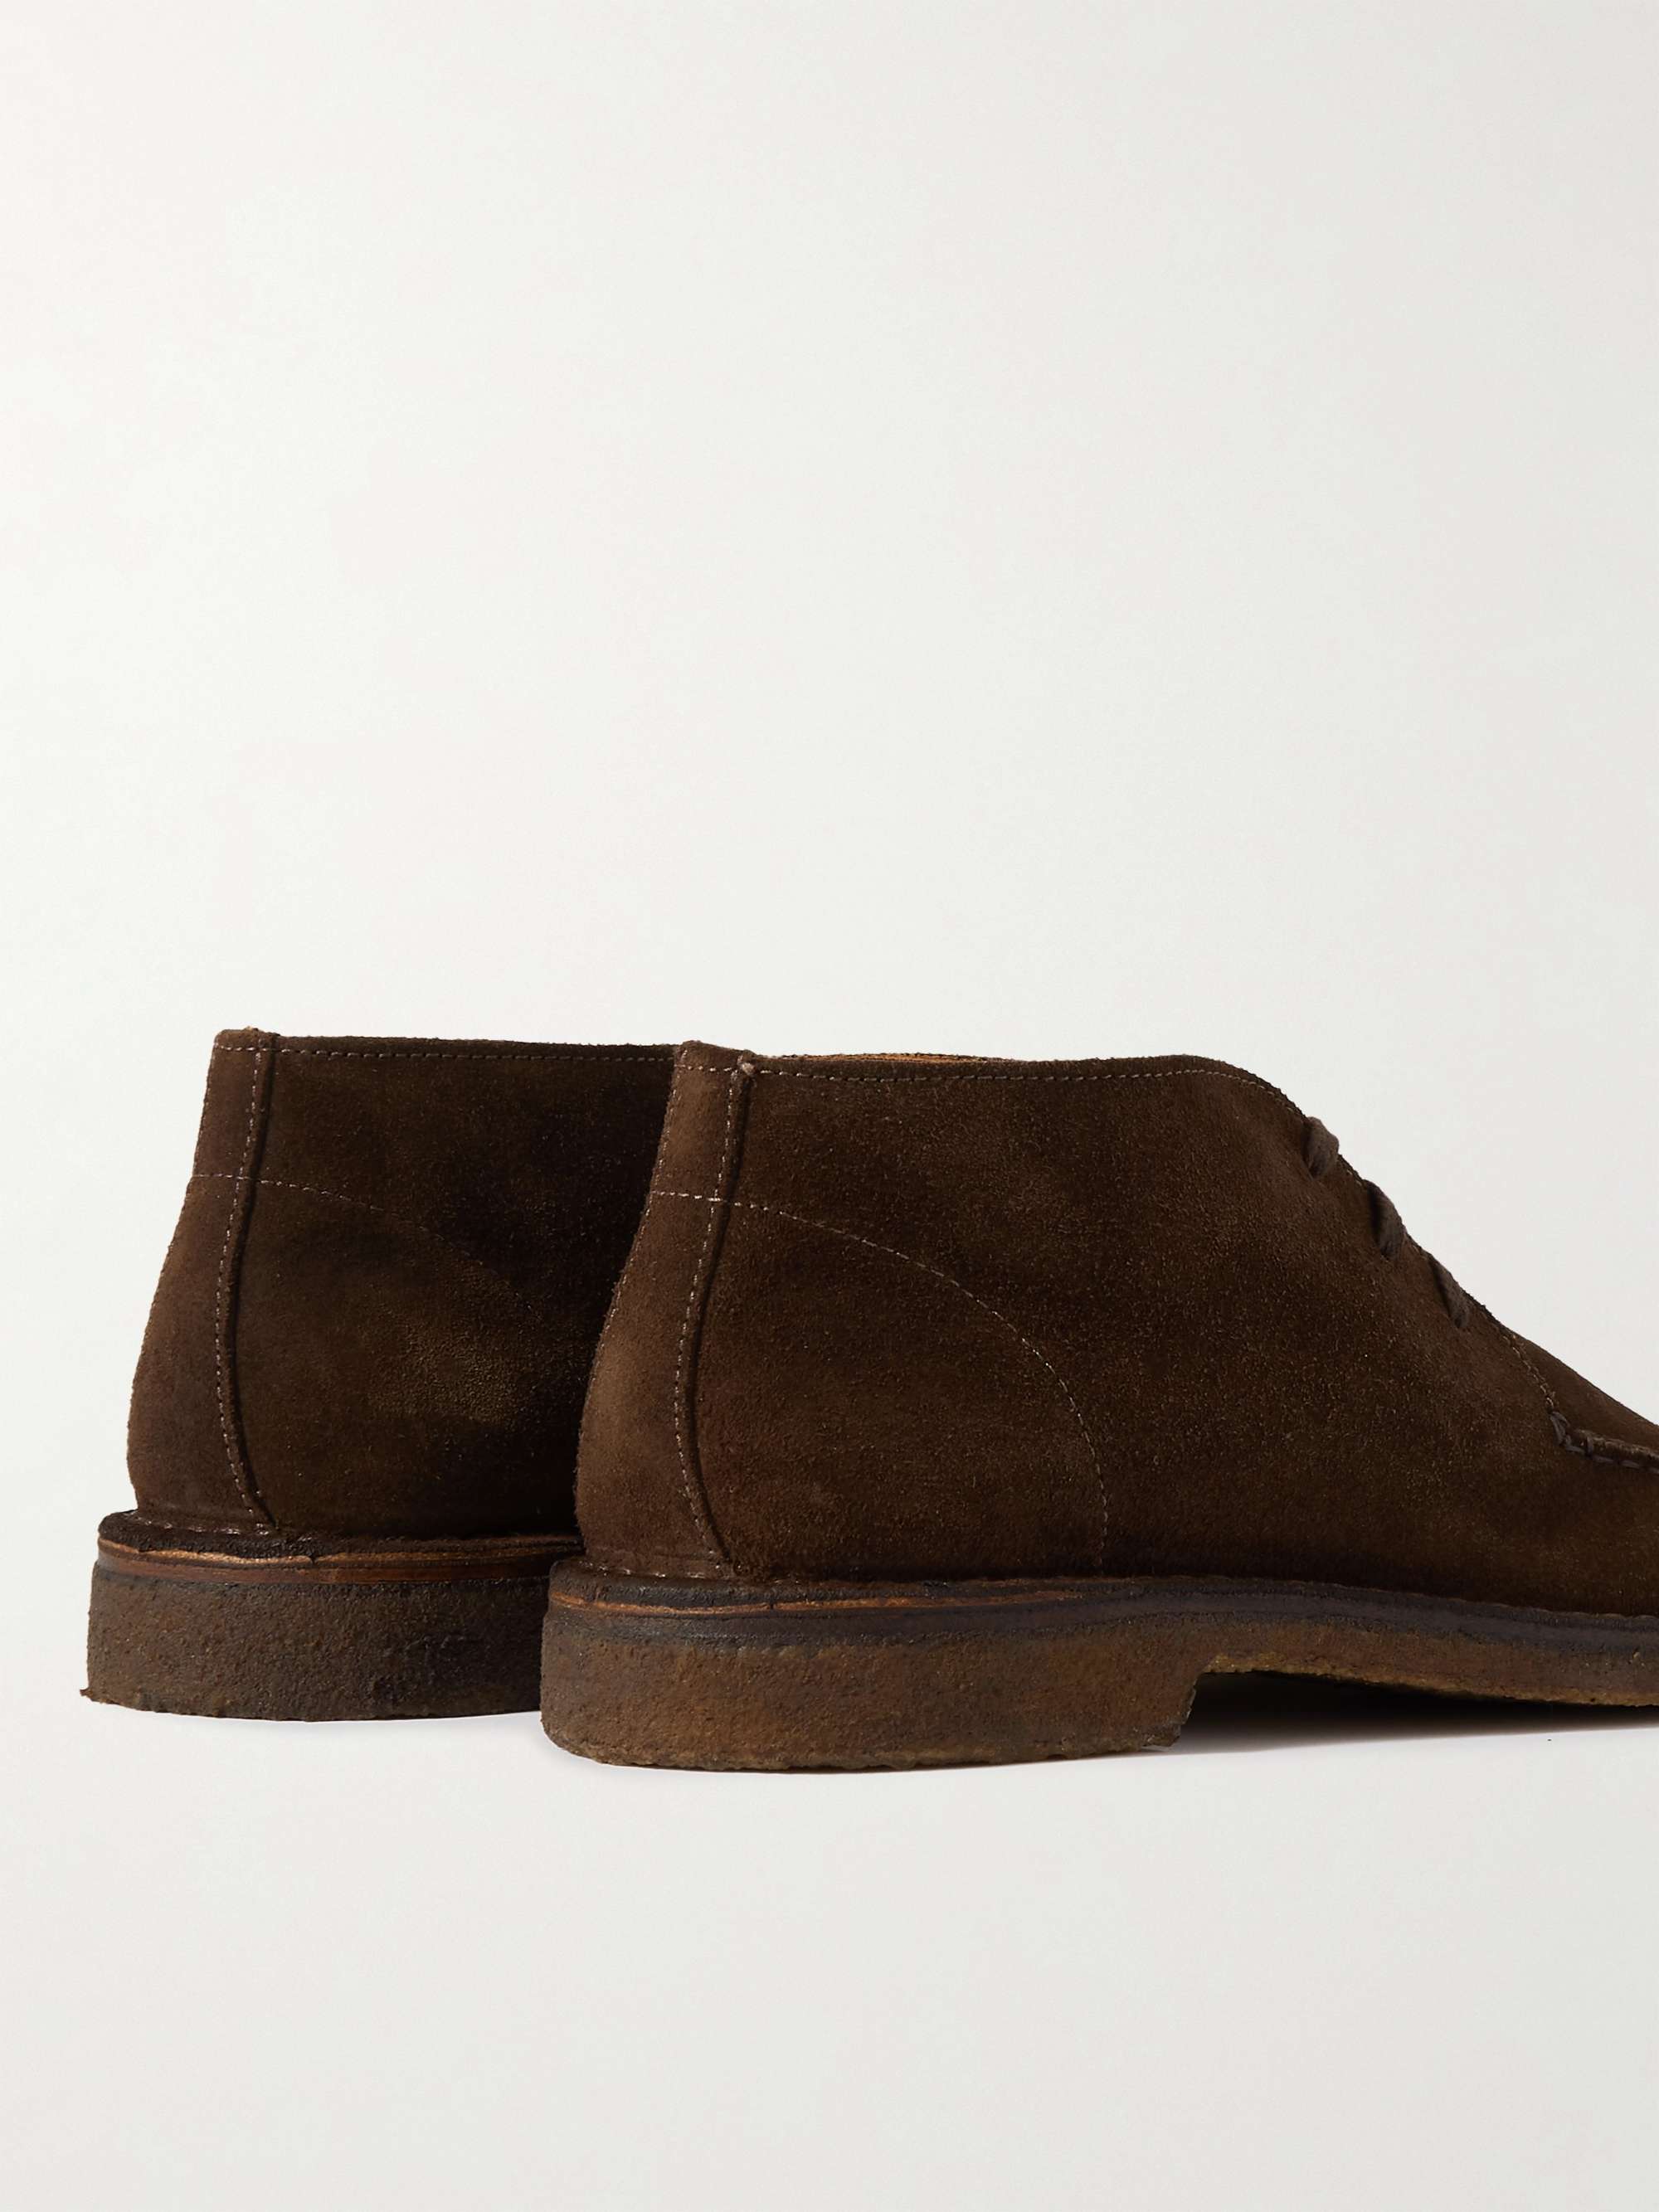 DRAKE'S Crosby Suede Chukka Boots for Men | MR PORTER